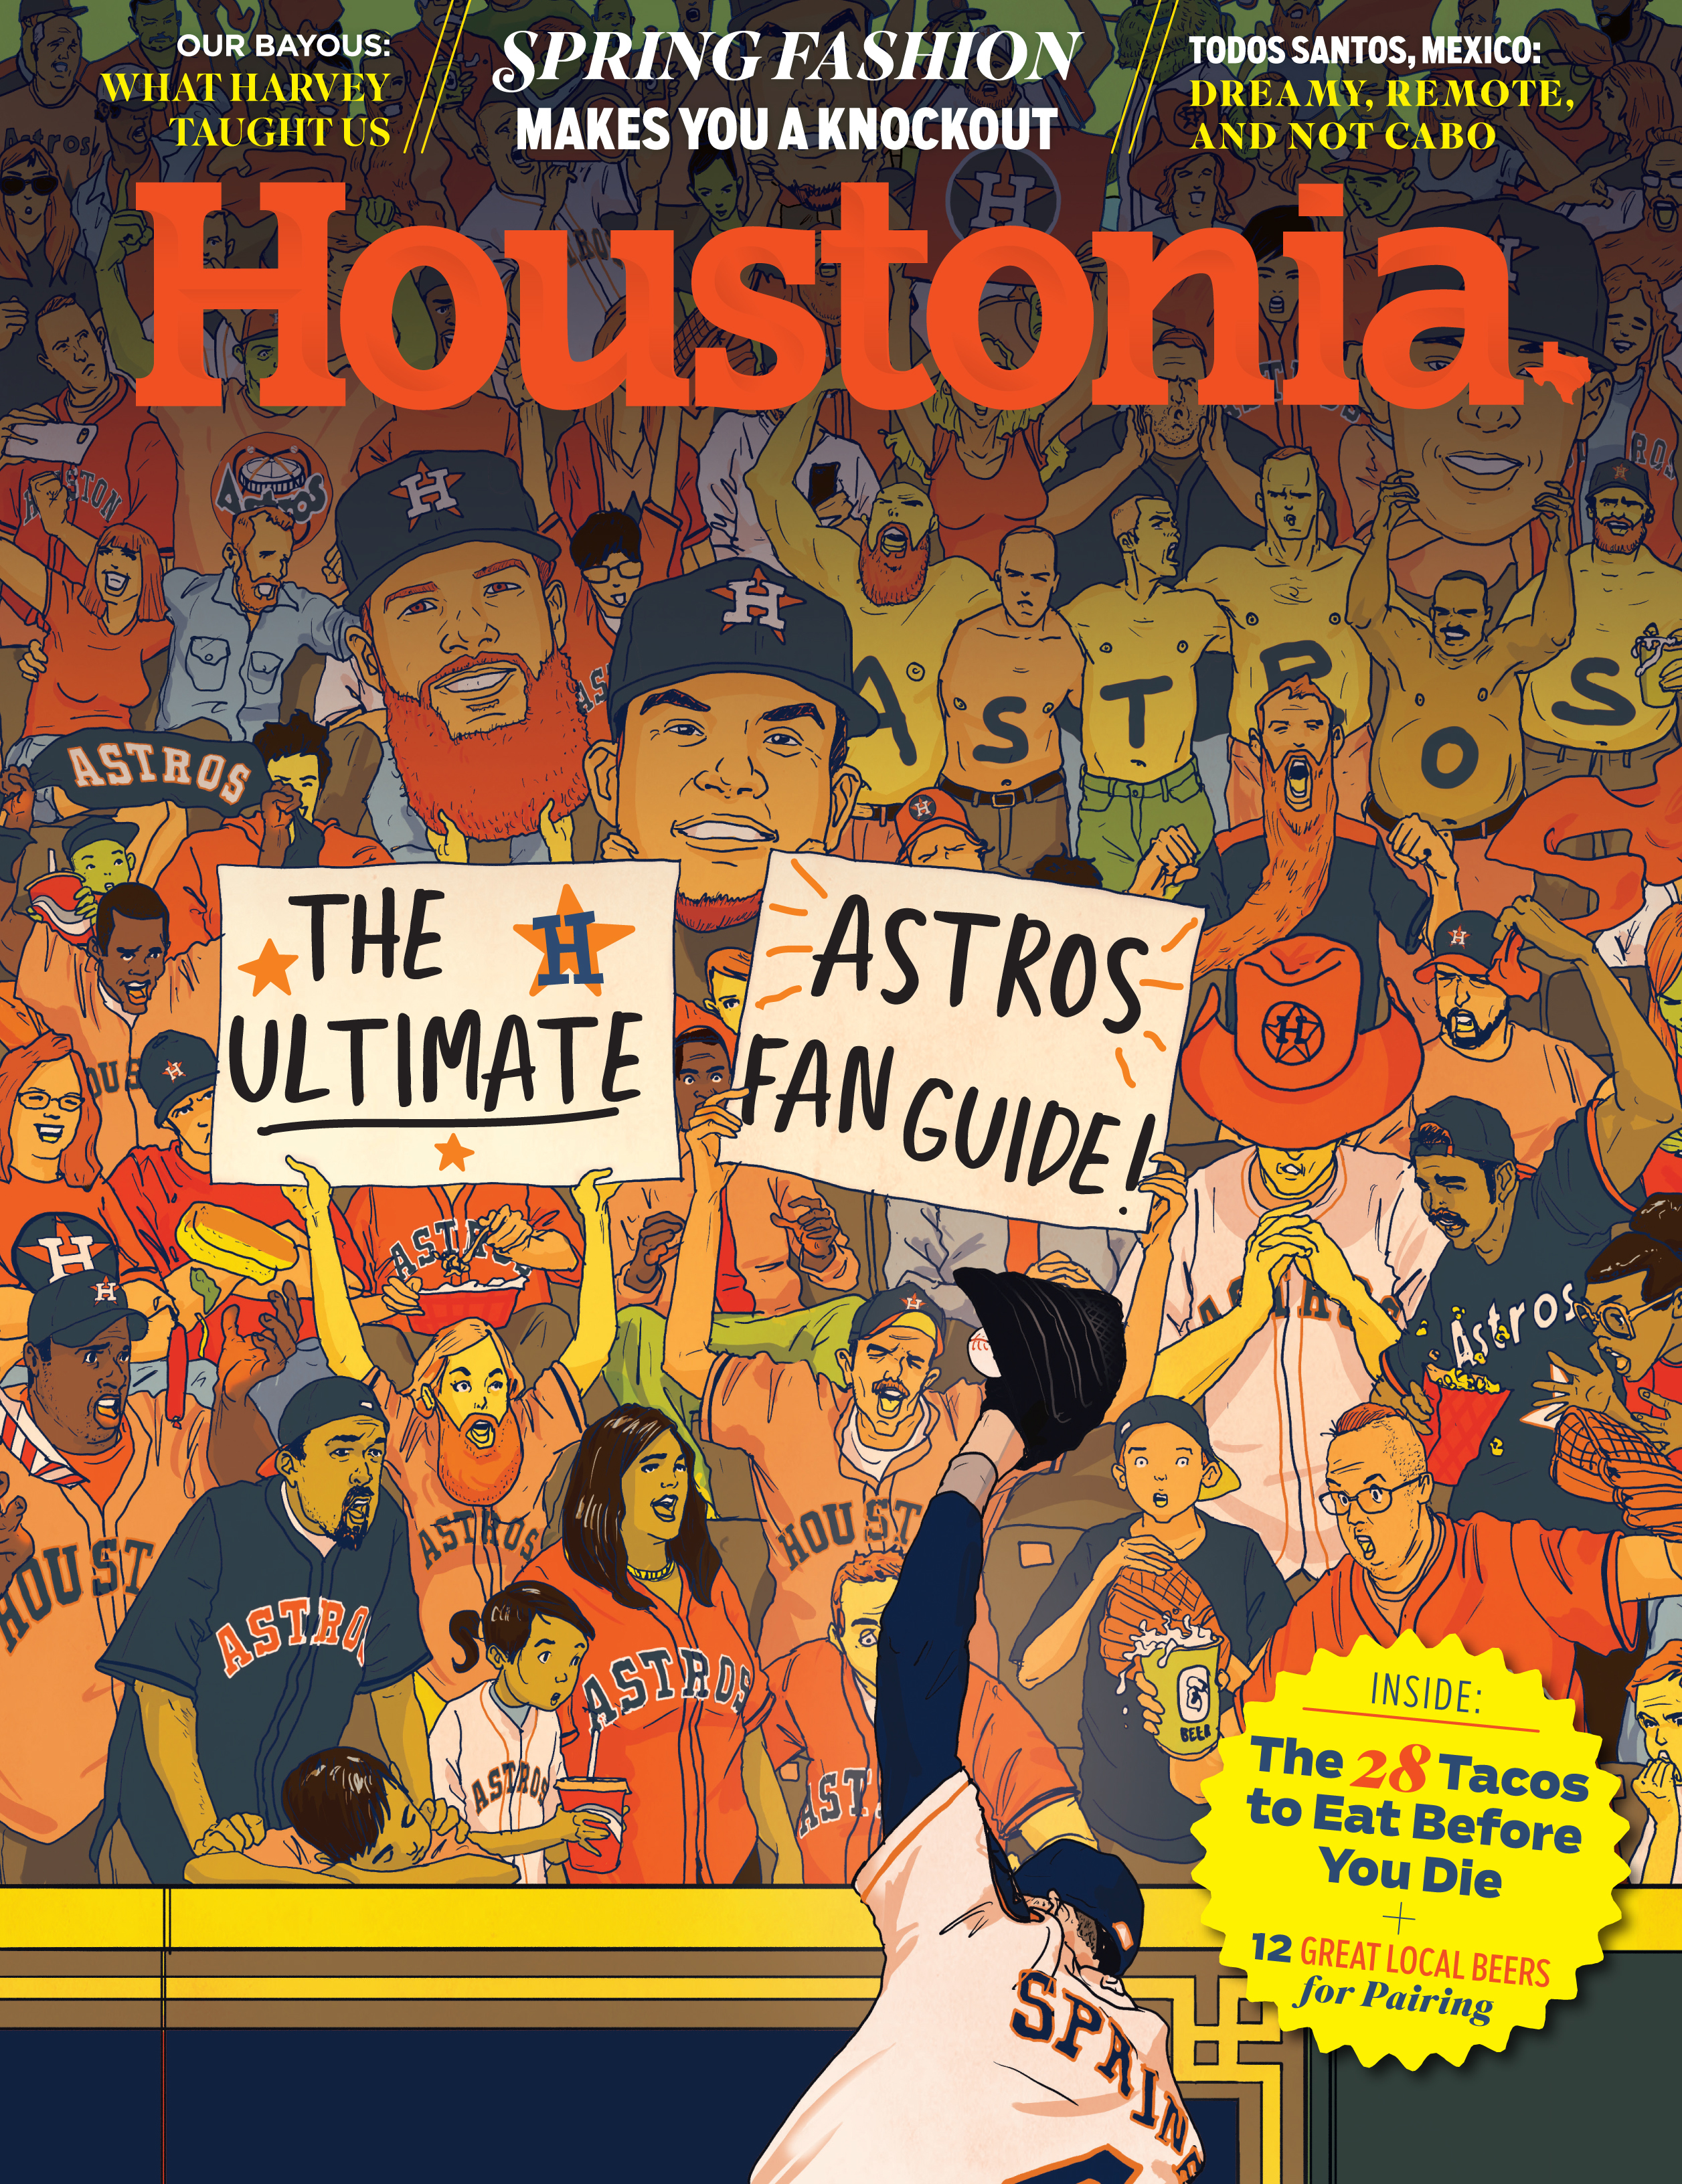 DOONEY & BOURKE Expands MLB Astros Accessories Collection for Fans